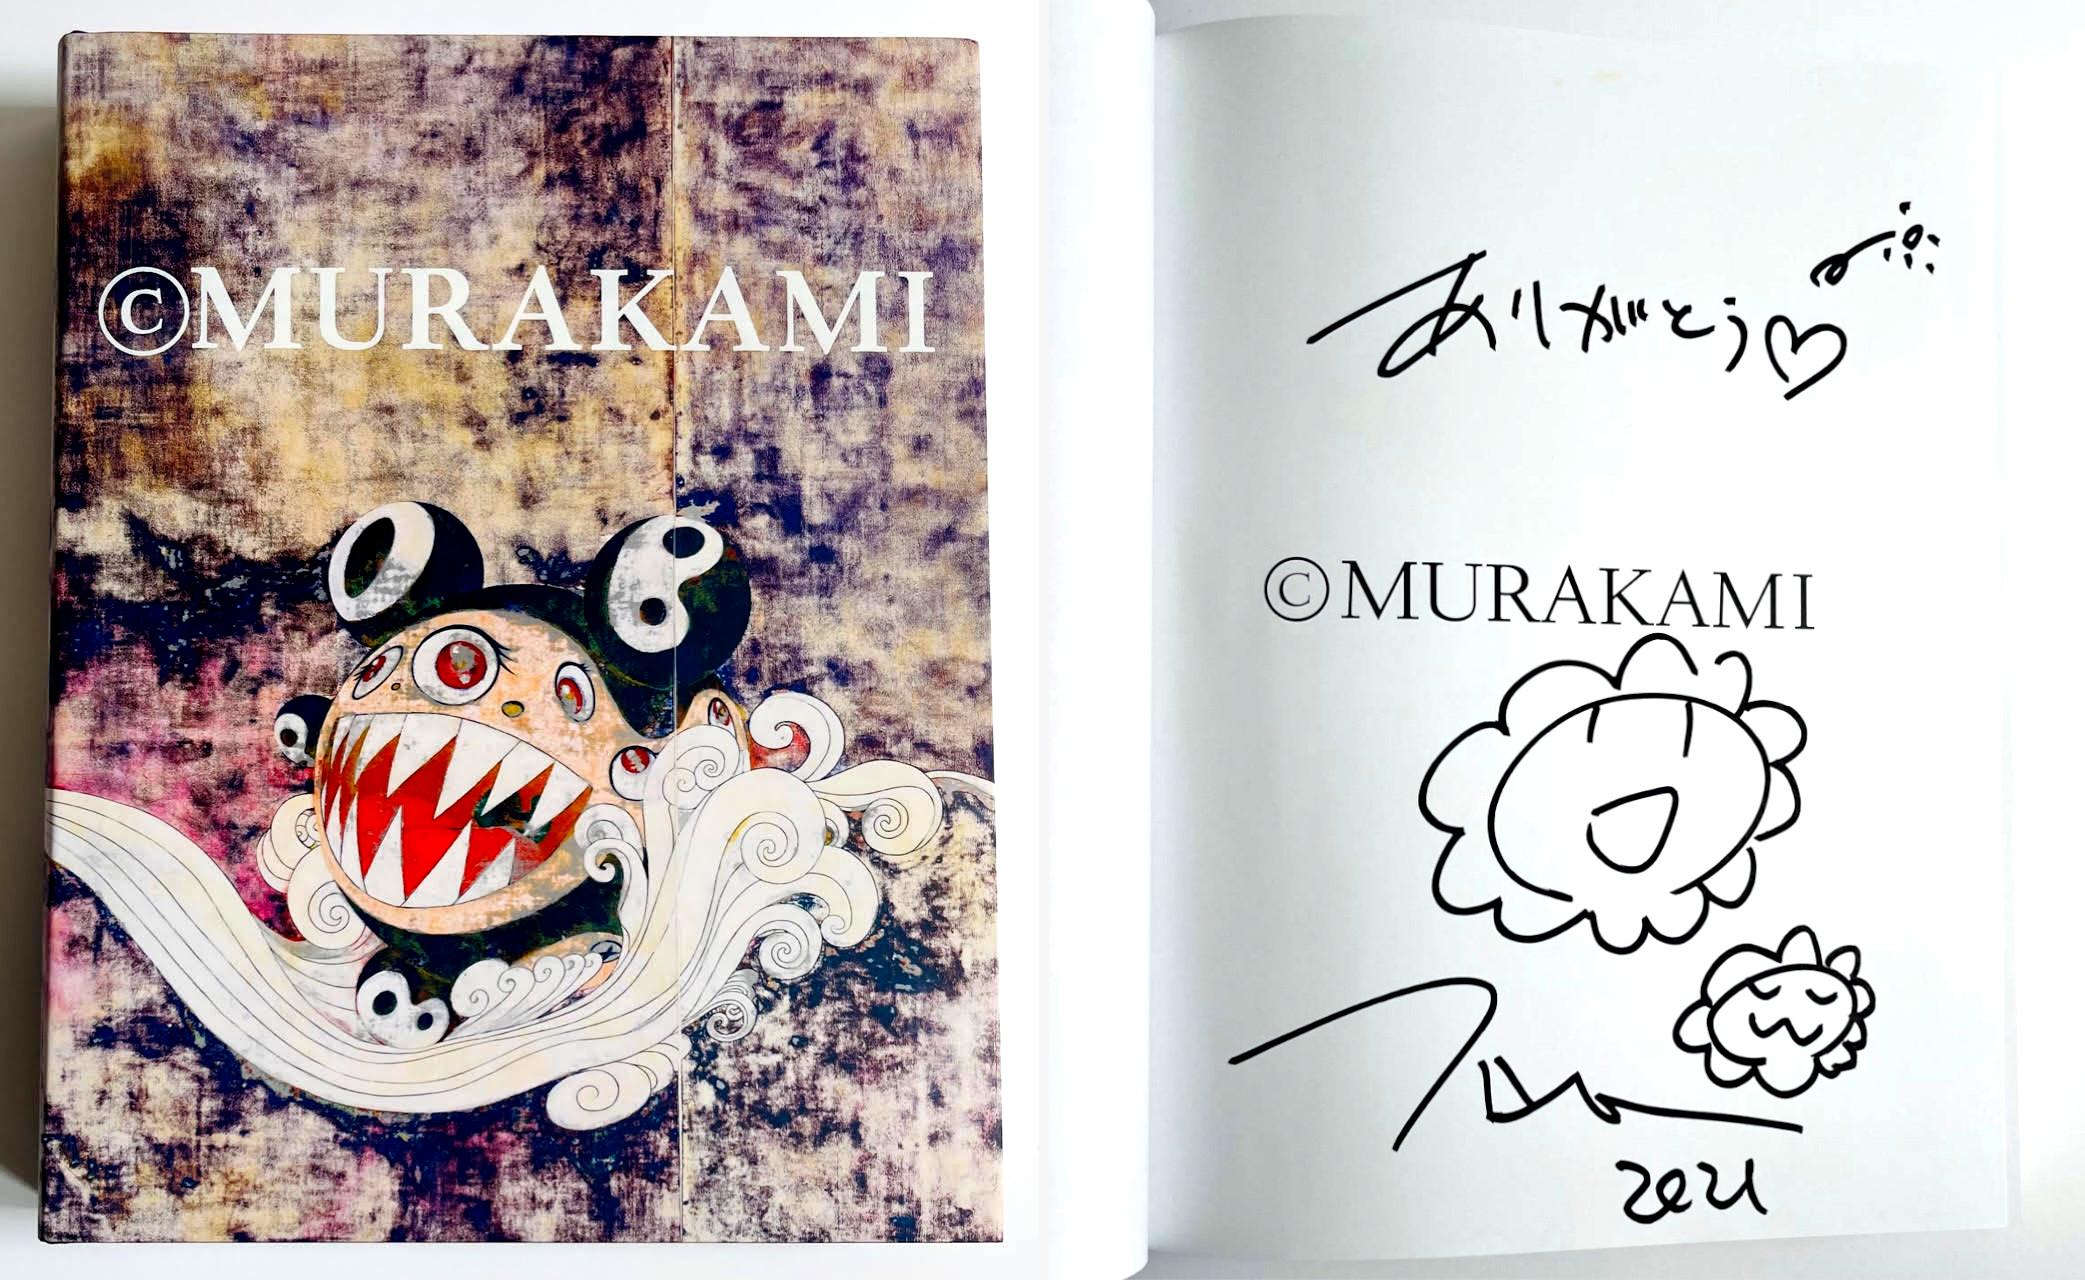 Takashi Murakami Abstract Drawing - Original signed drawing in book, Two Flowers with heart, inscribed in Japanese 